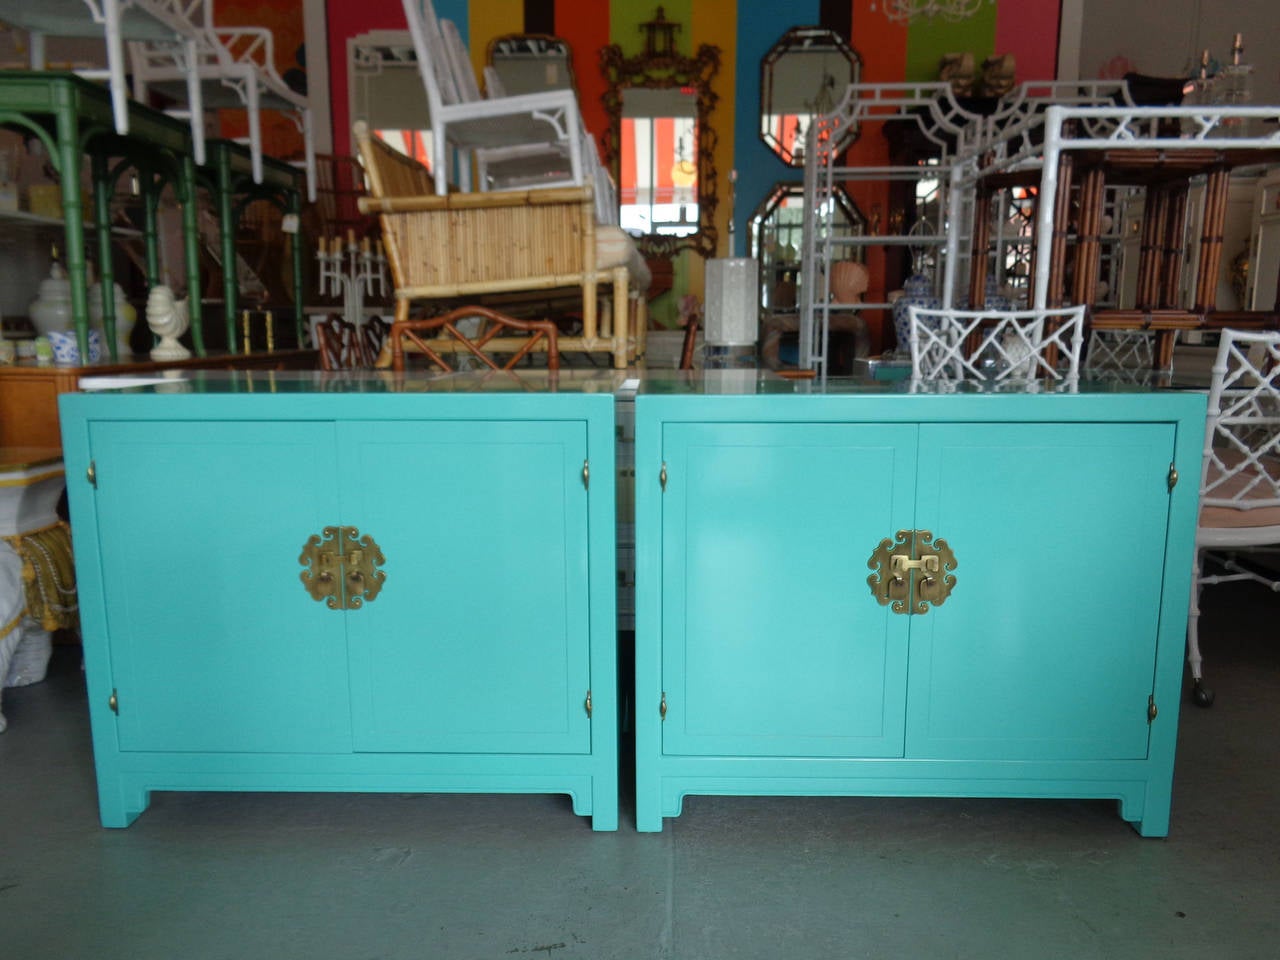 Pair of MING Style Cabinets in nice as found VINTAGE condition. There are imperfections to the NEWLY lacquered finish. Benjamin Moore Capri Seas